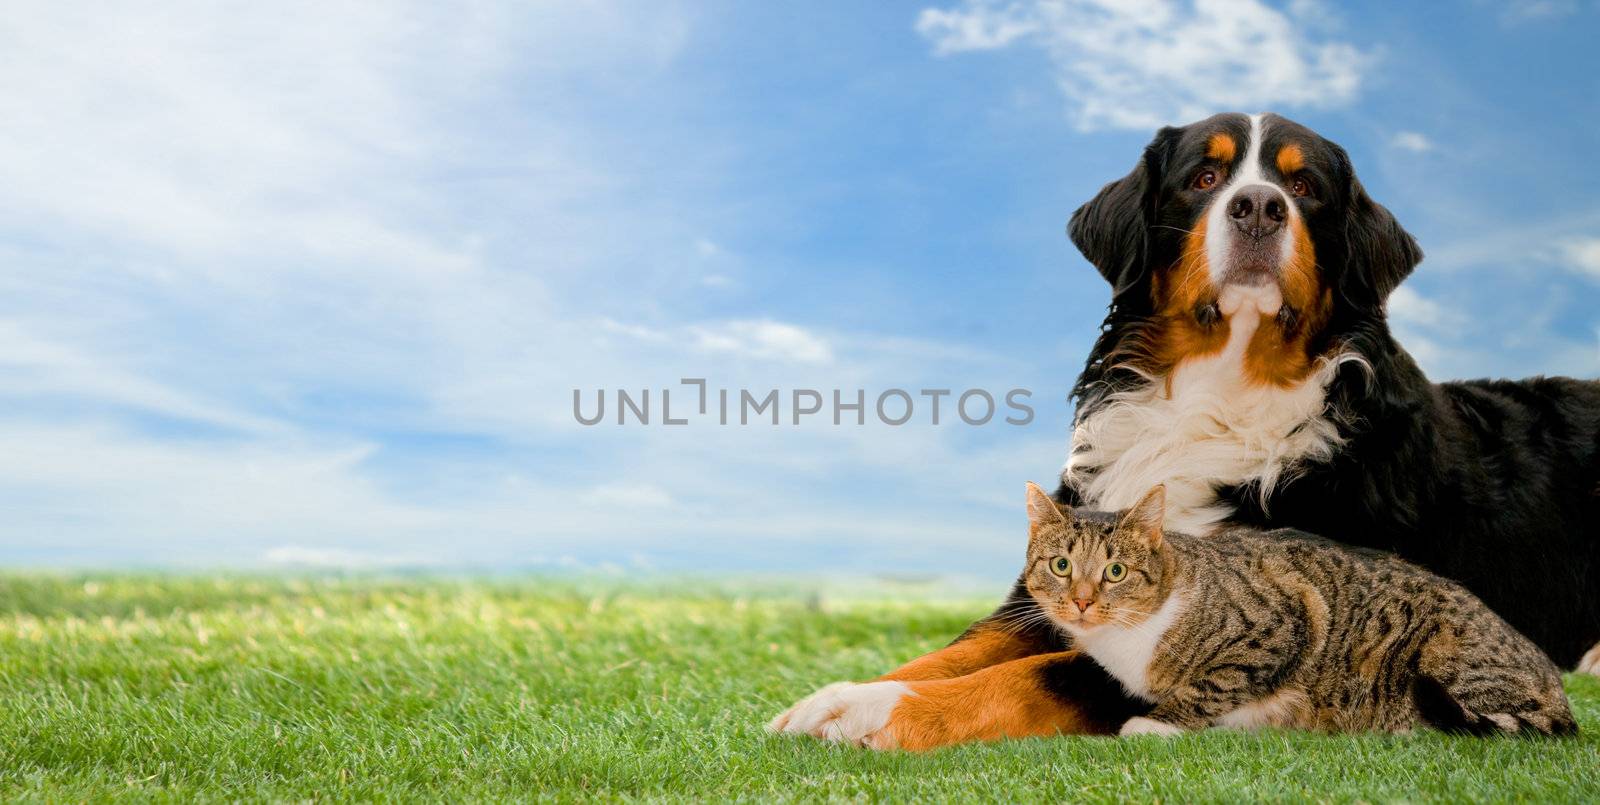 Dog and cat together by photocreo